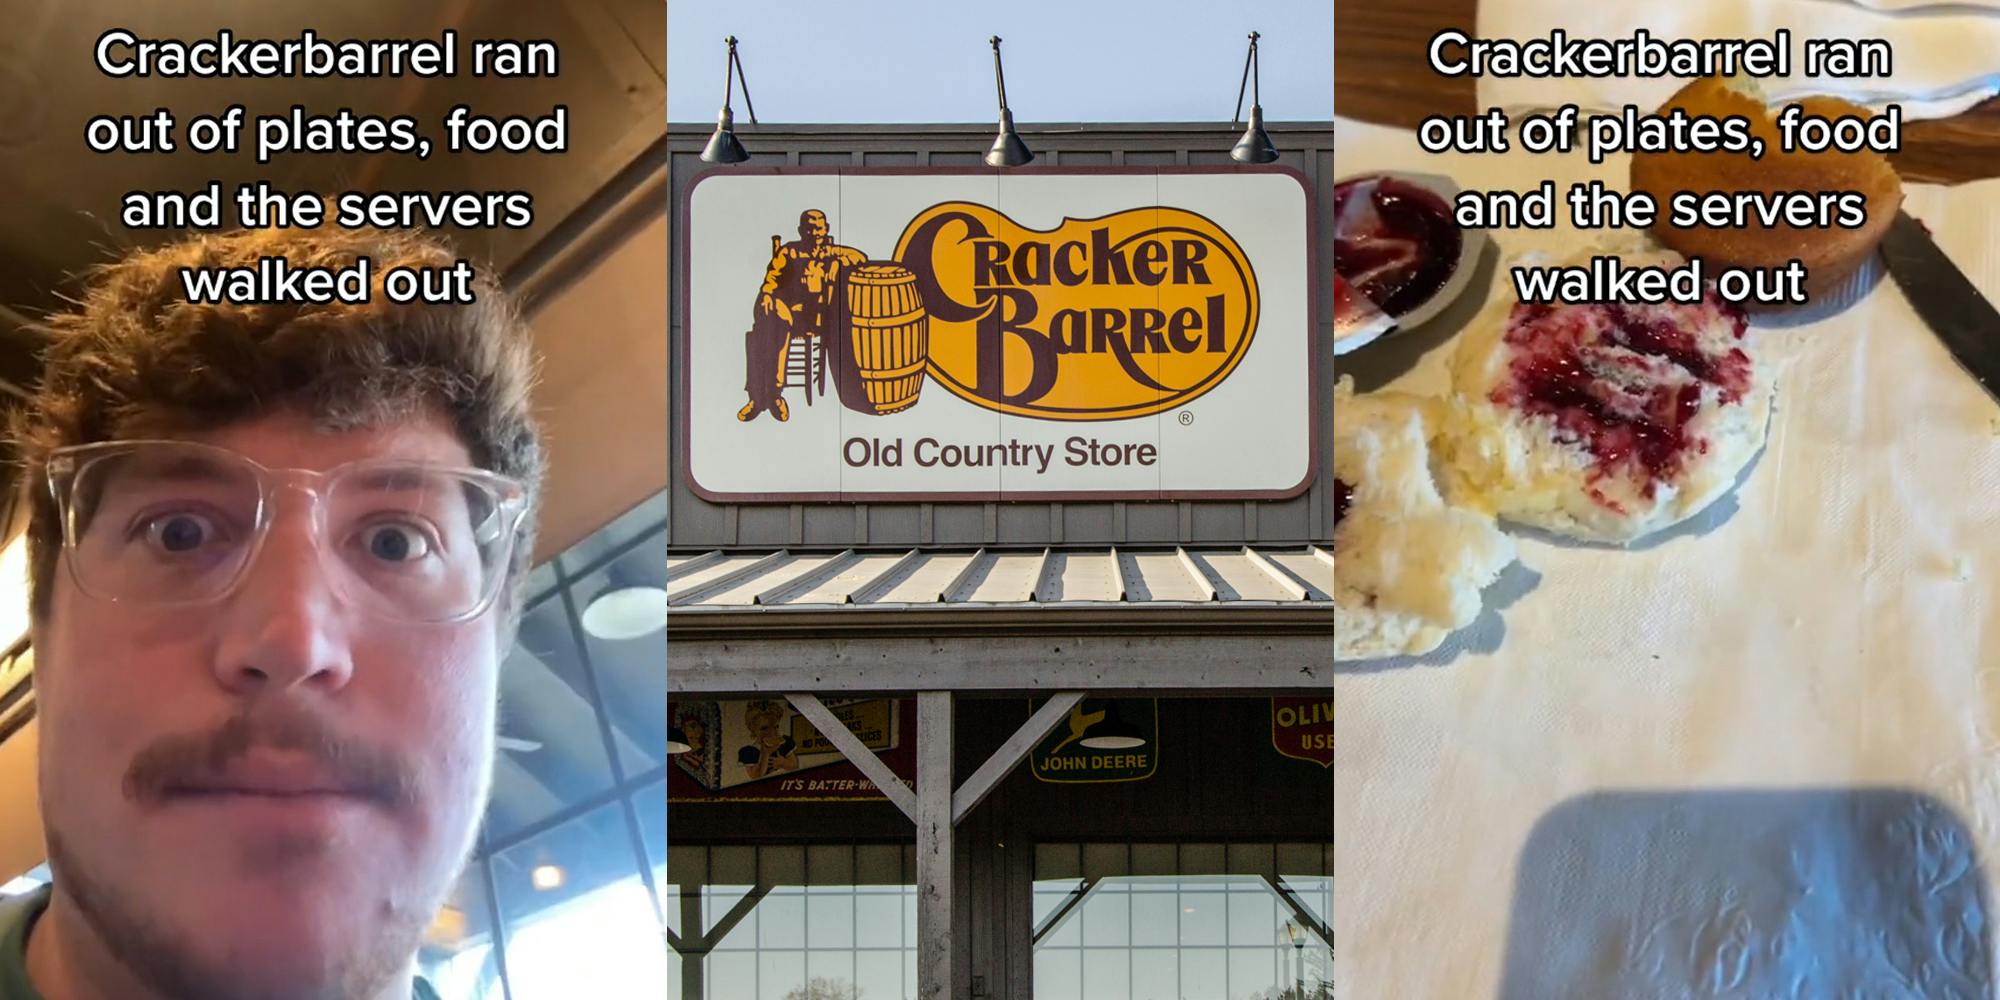 man staring with caption "Crackerbarrel ran out of plates, food and the servers walked out" (l) Cracker Barrel sign on building (c) food on napkin on table caption "Crackerbarrel ran out of plates, food and the servers walked out" (r)